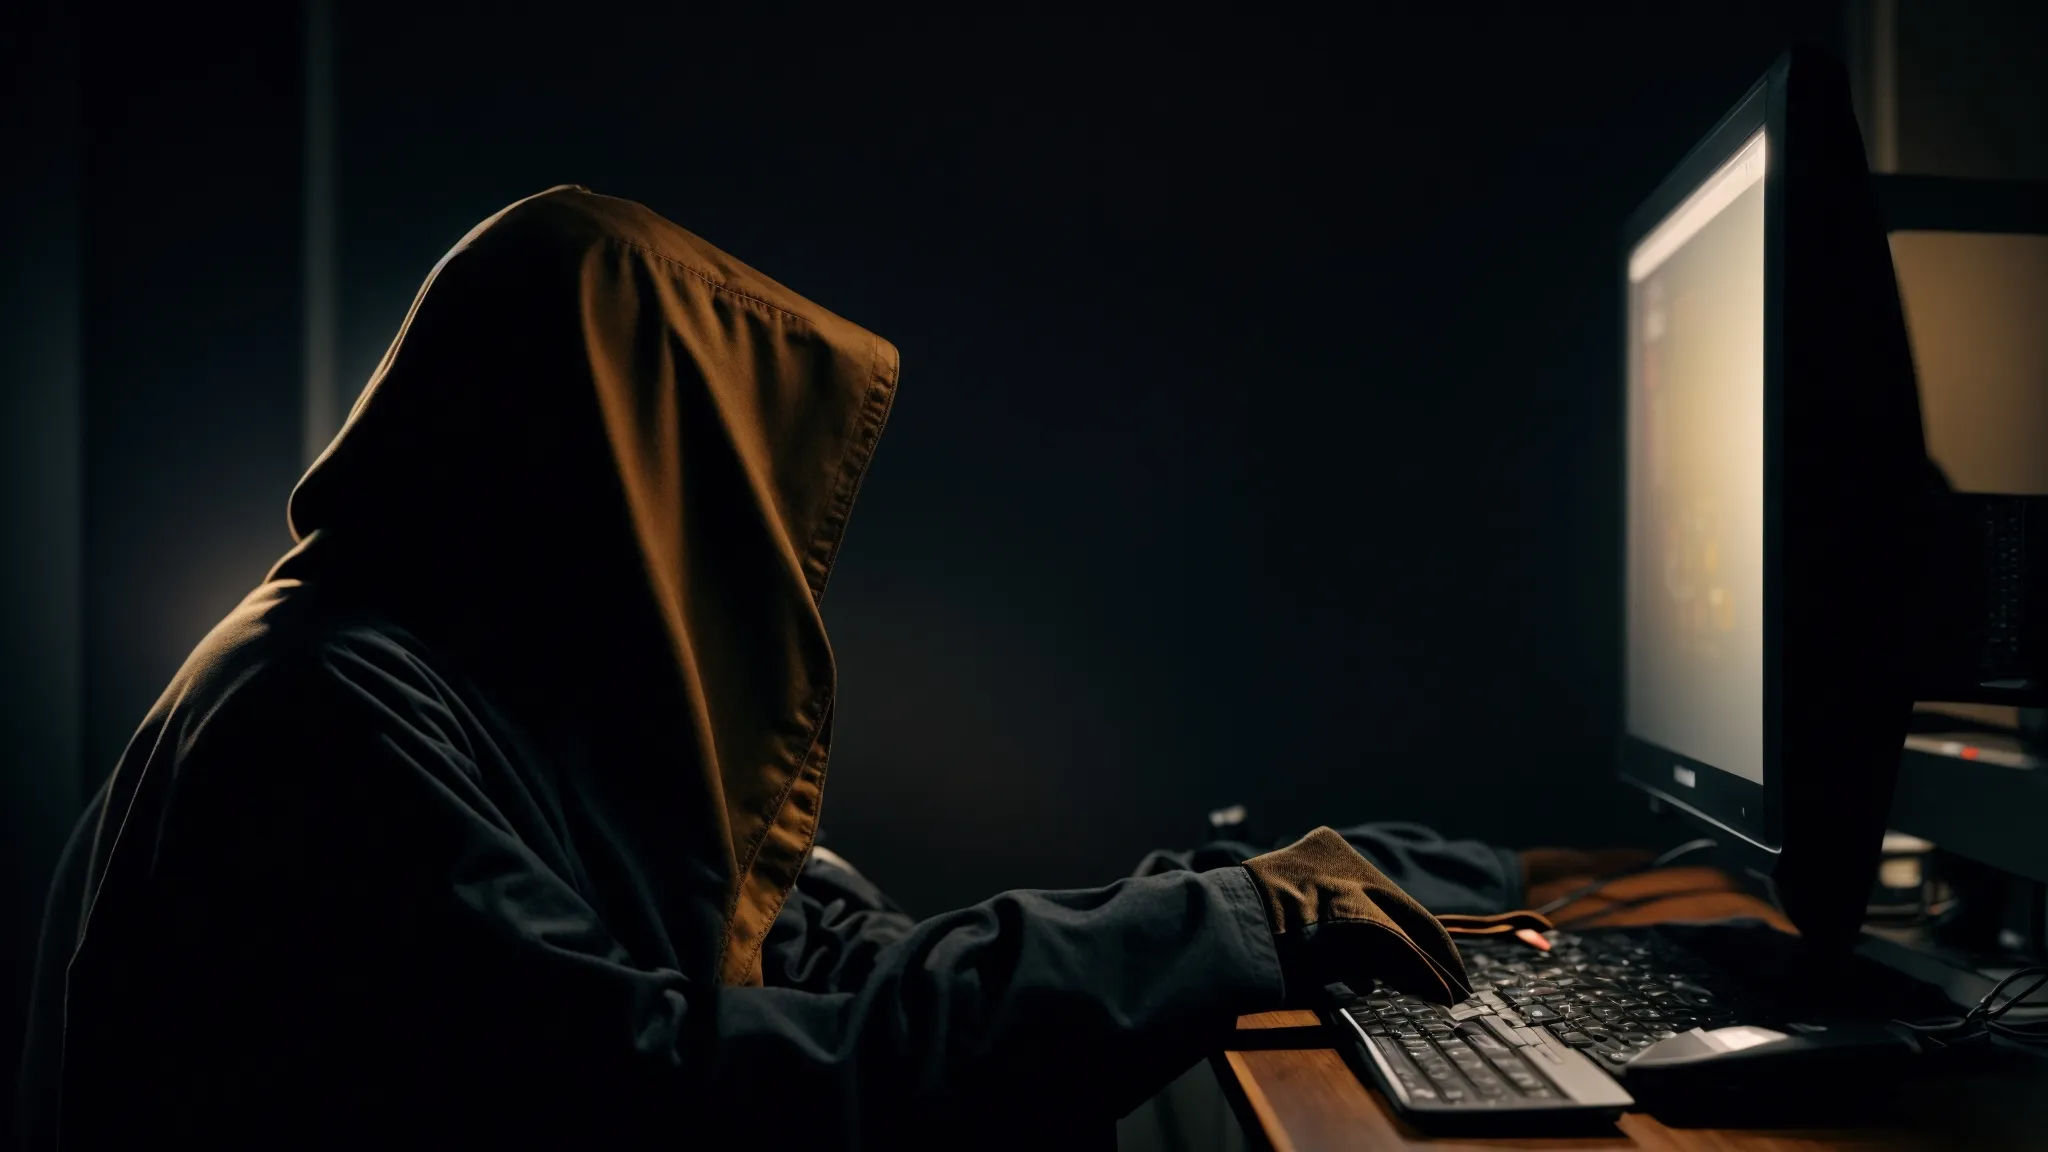 a cloaked figure stealthily inserting a virus into a computer in a dimly lit room.